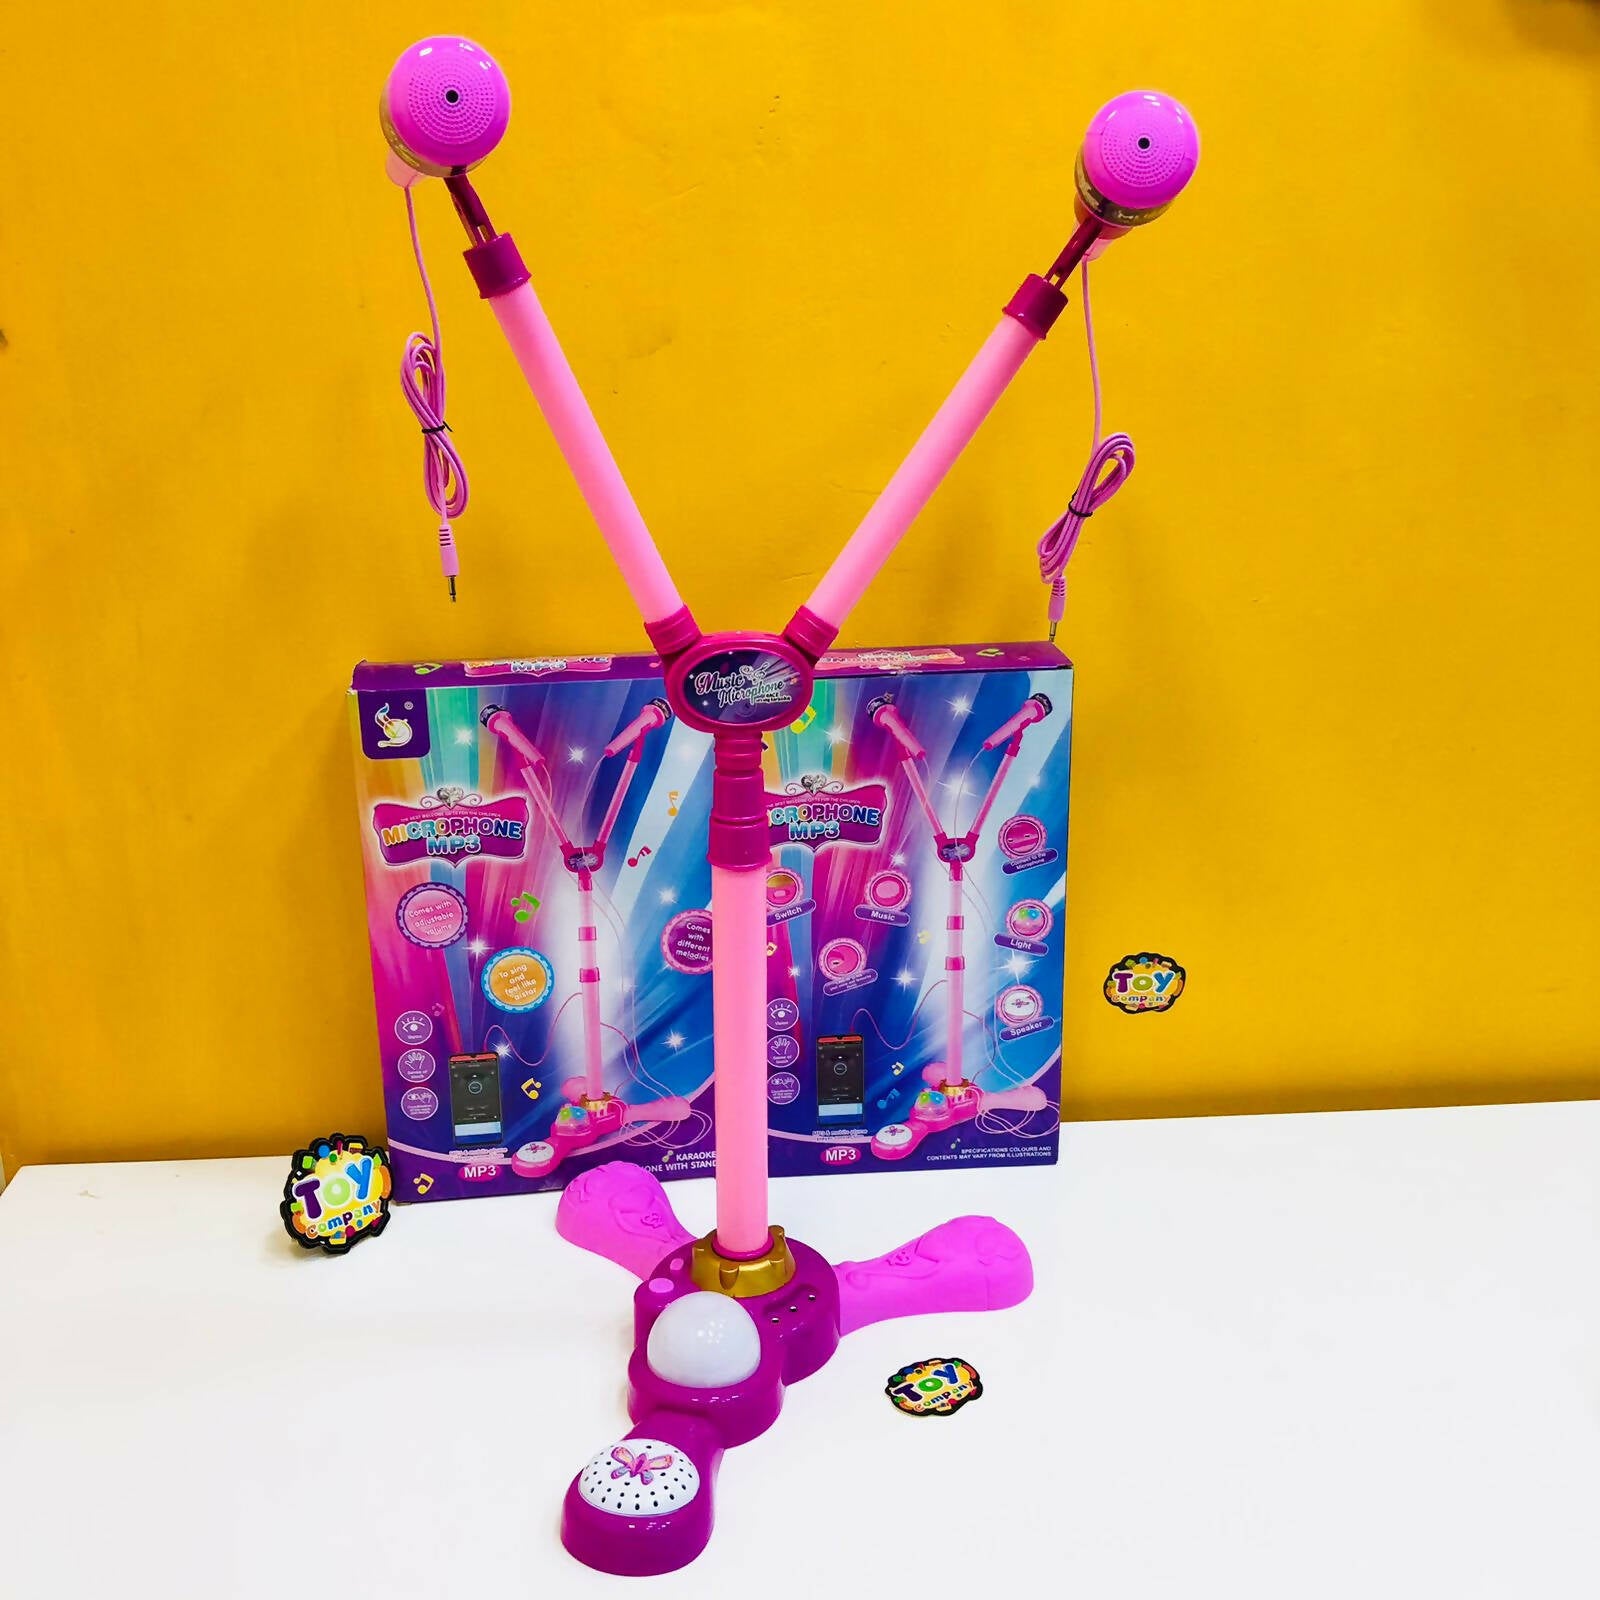 Karaoke MP3 Microphones With Stand